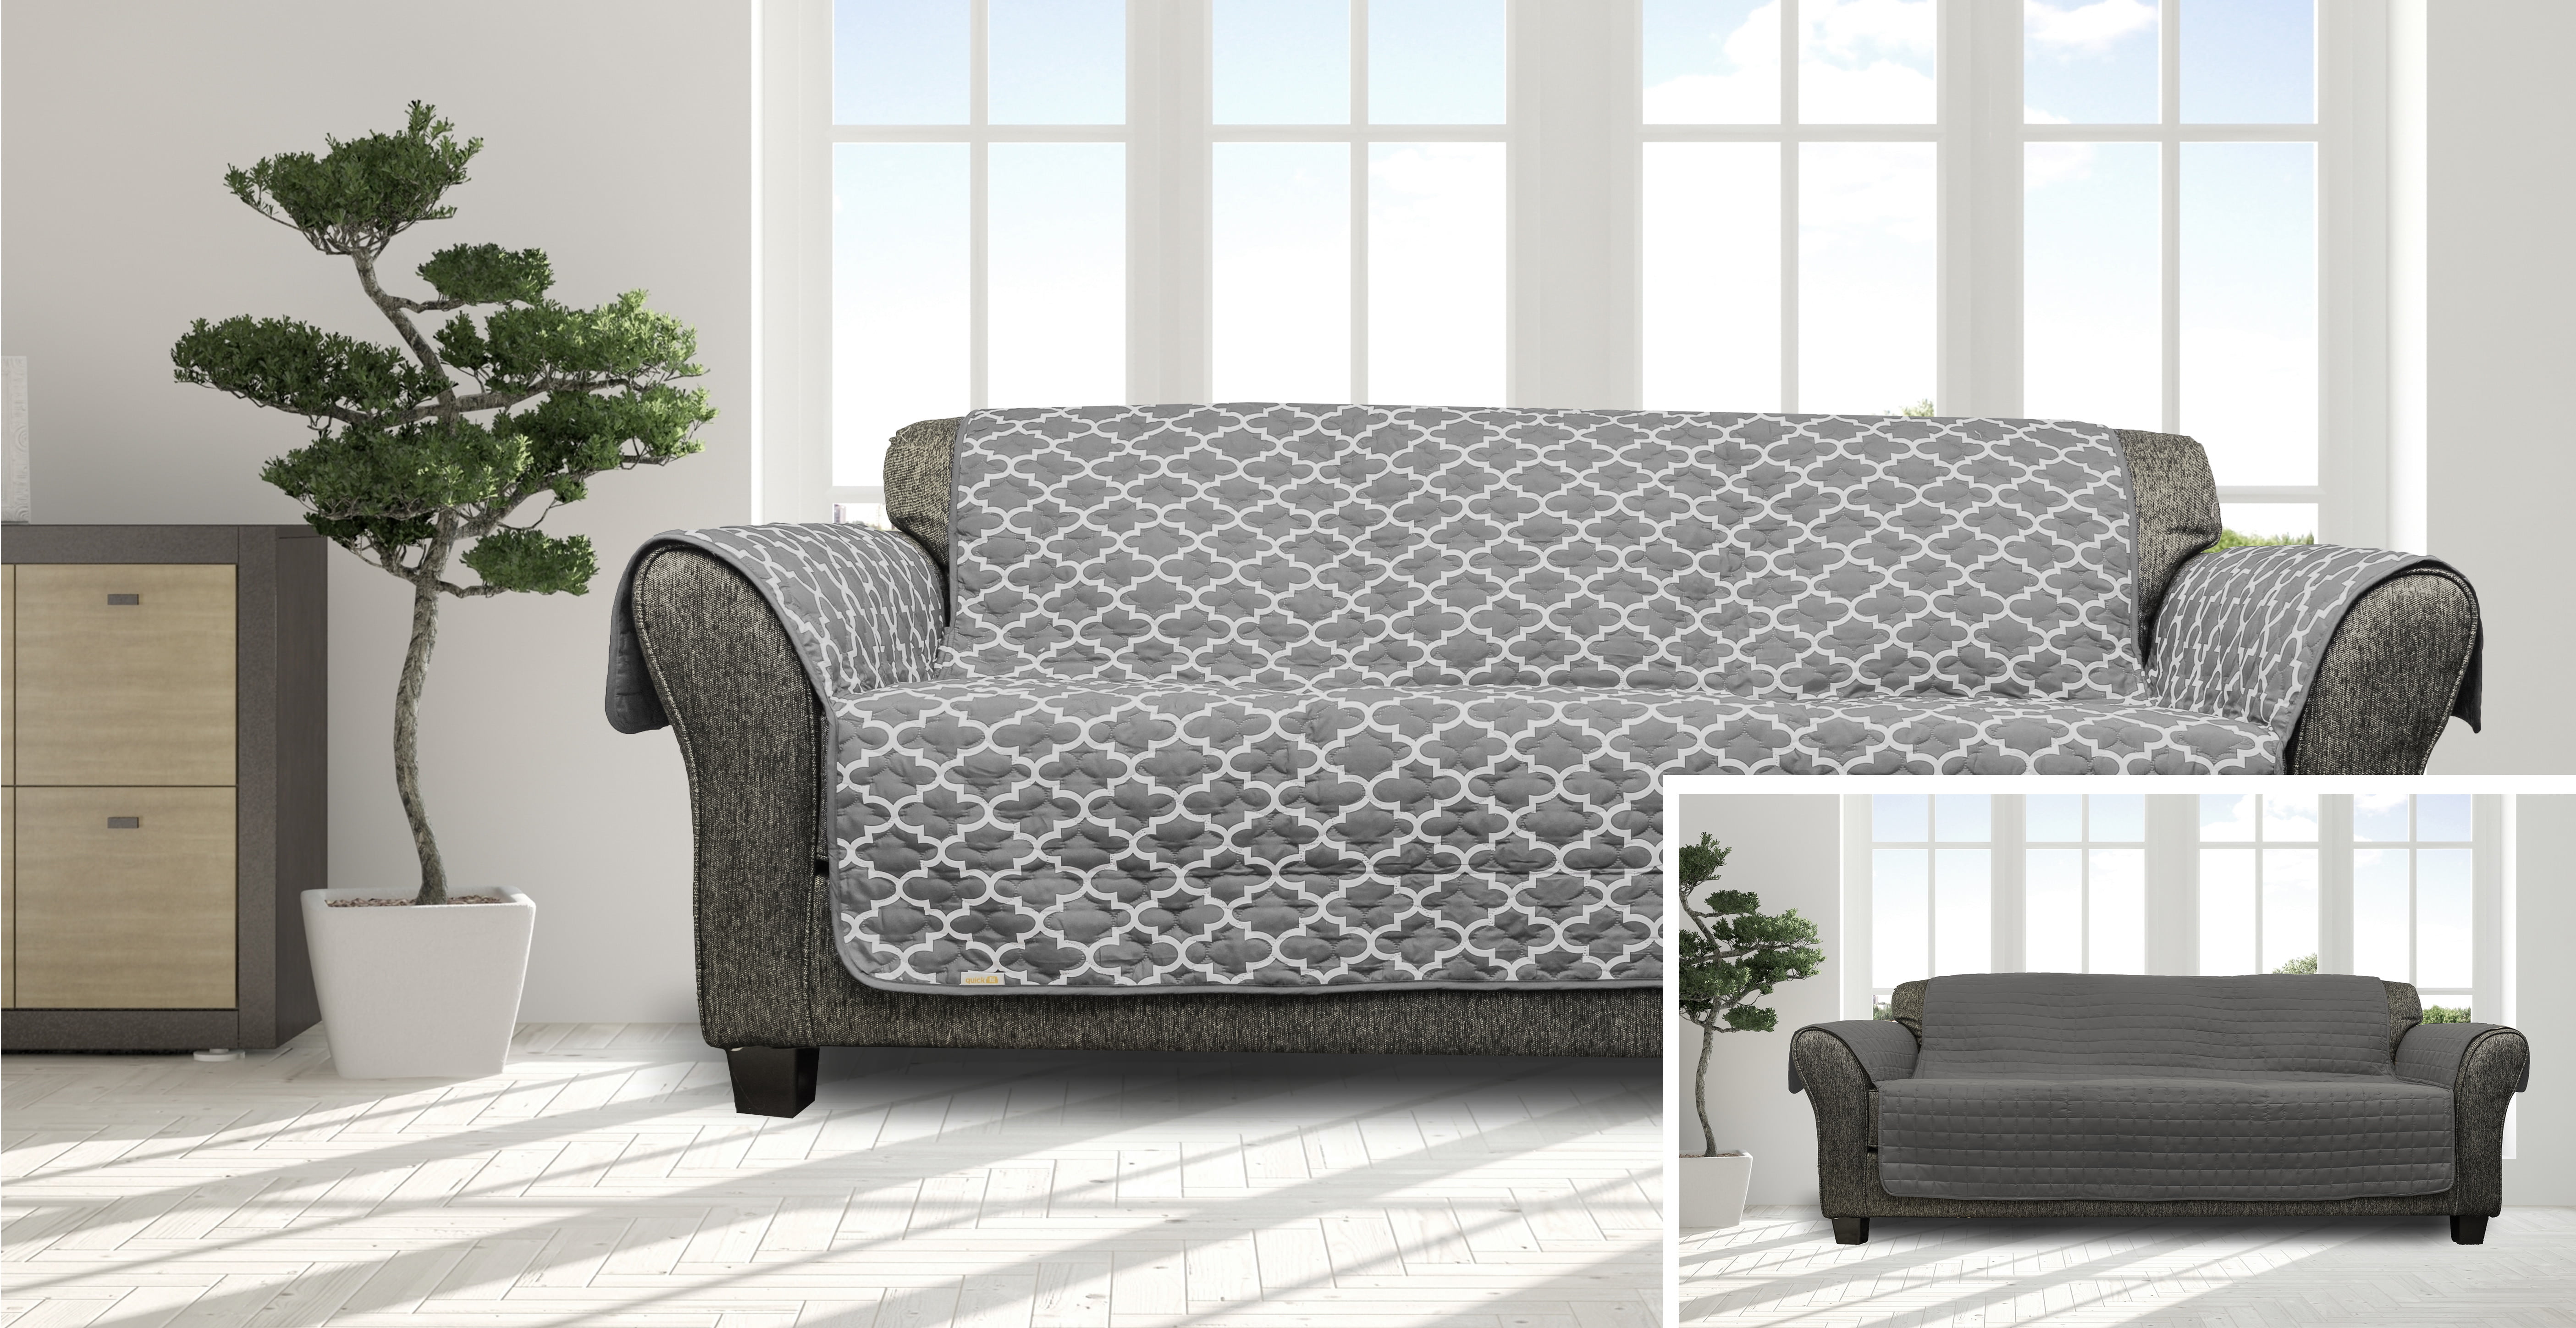 Sofa Protector Soil & Snag Resistant Quilted Microfibe Throw Grey 1 2 3 Seater 